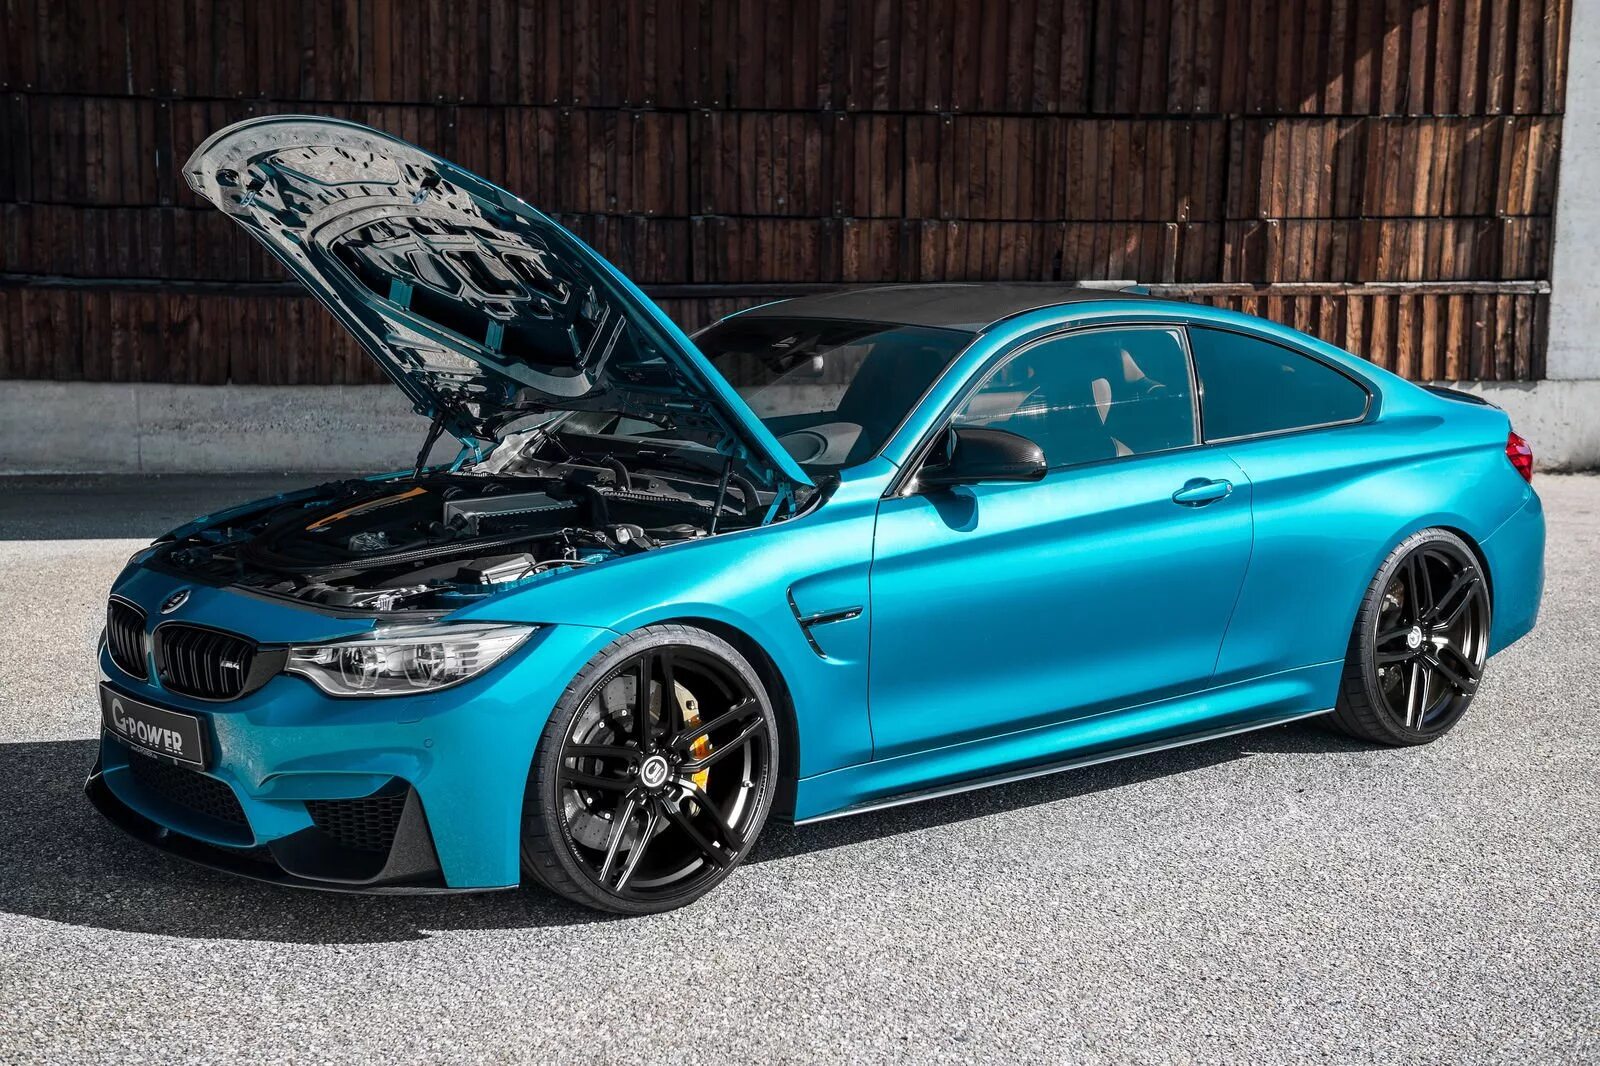 Bmw m4 coupe. BMW m4. BMW m4 Coupe 2016. BMW m4 Competition Coupe f82.